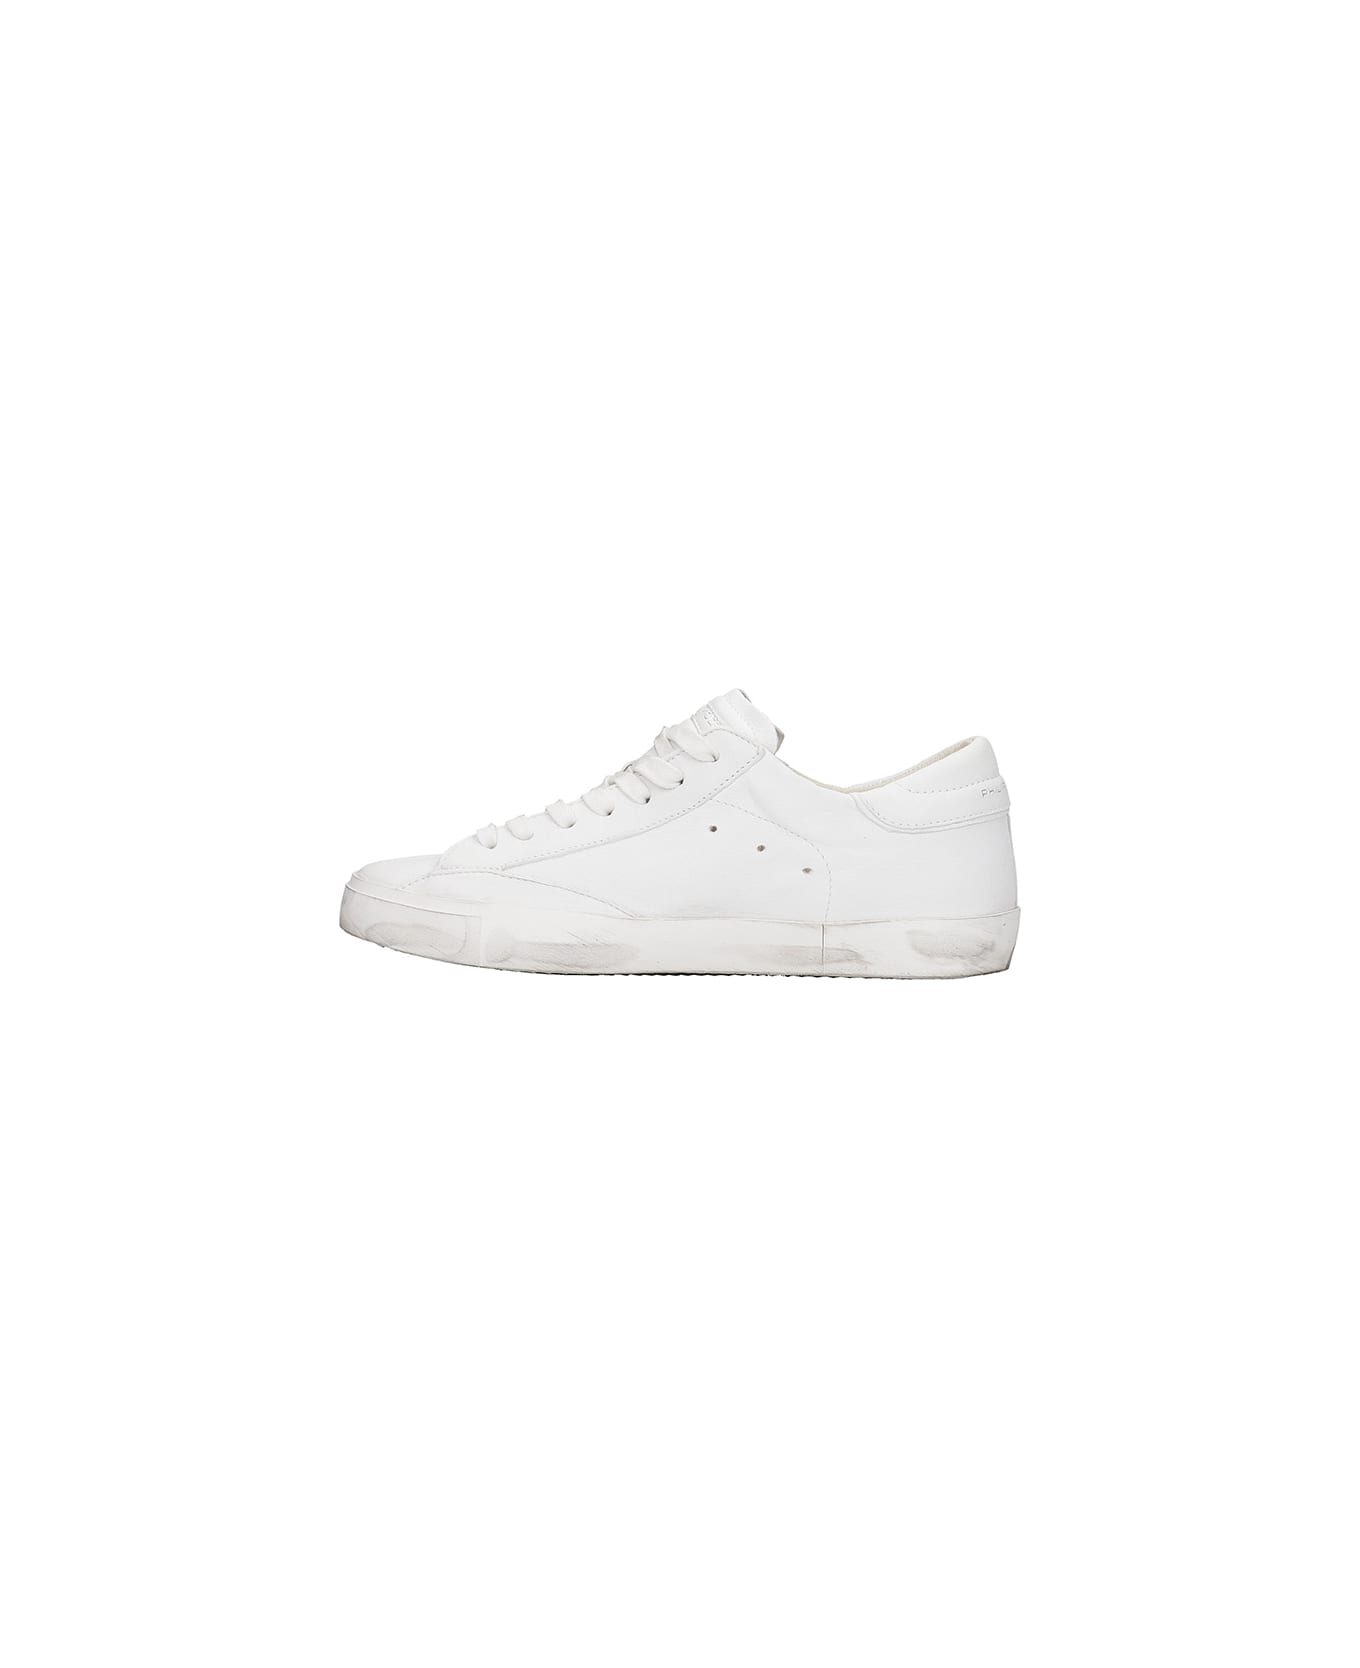 Philippe Model Prsx L Sneakers In White Leather - WHITE スニーカー